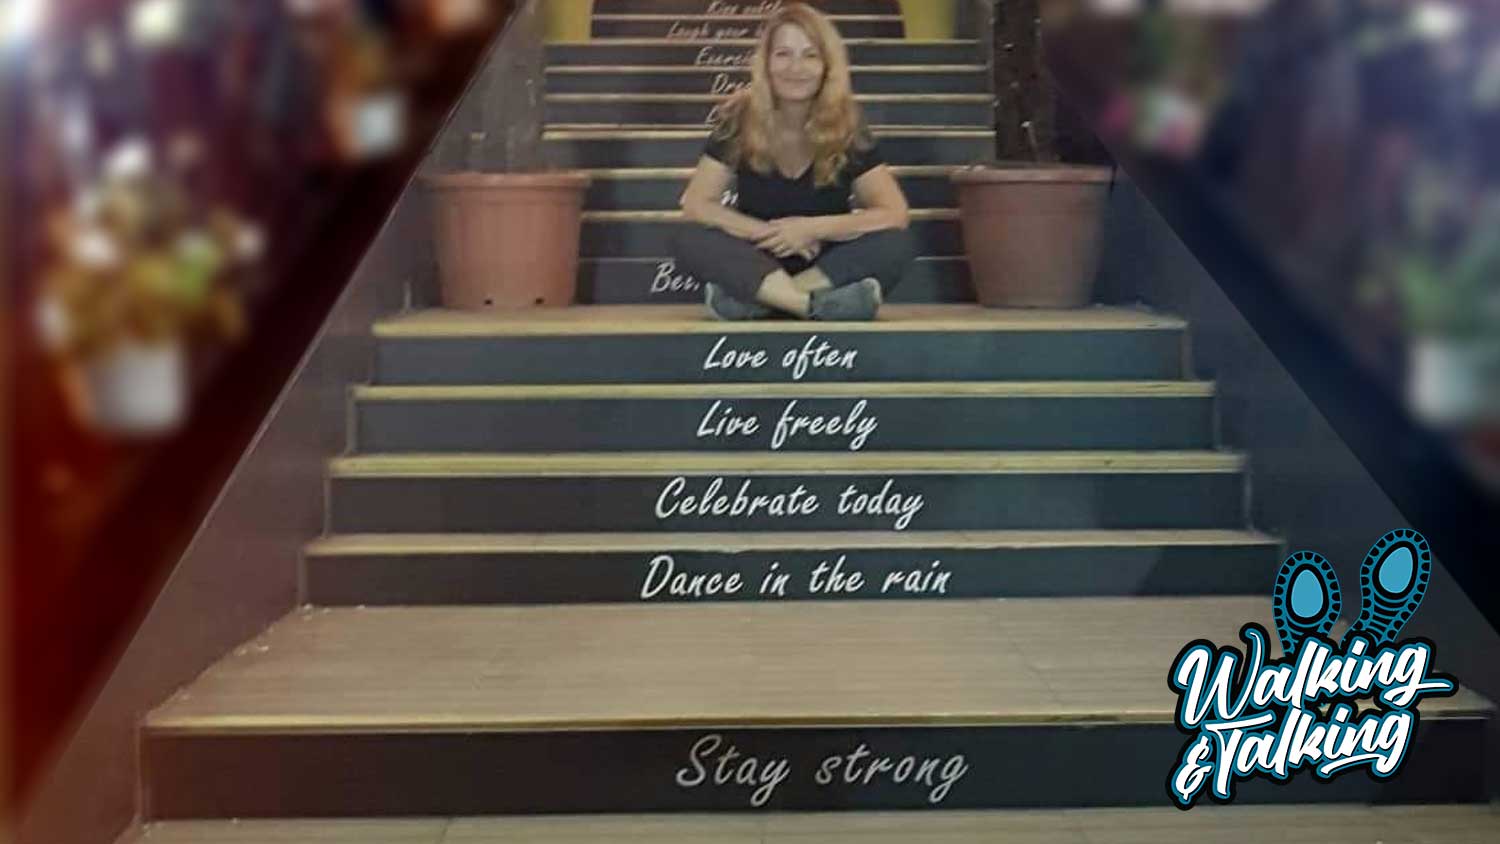 Helen sitting on stairs with positive words